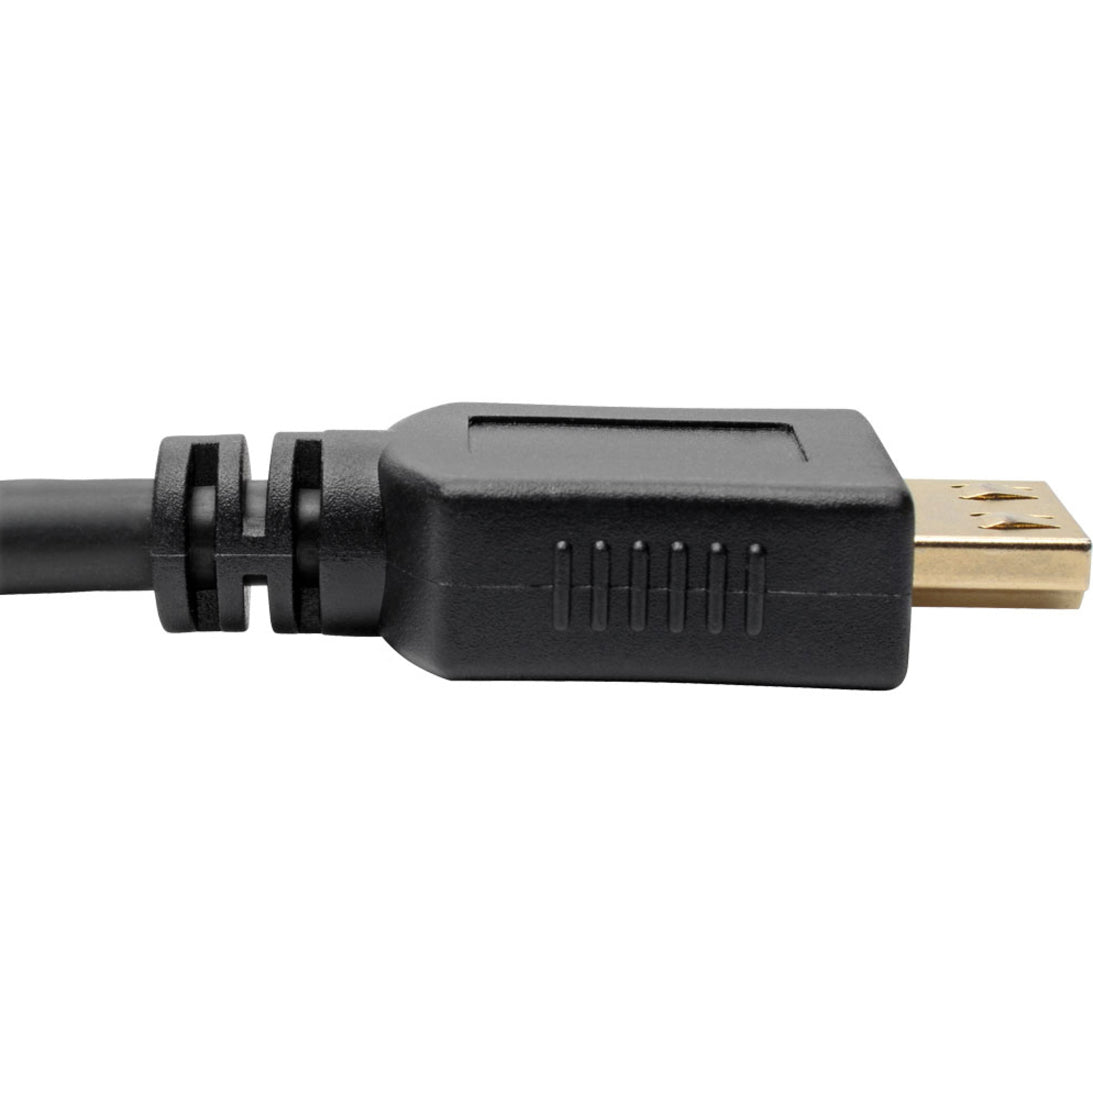 Tripp Lite P568-030-BK-GRP High-Speed HDMI Cable, 30 ft., with Gripping Connectors - 4K, Black